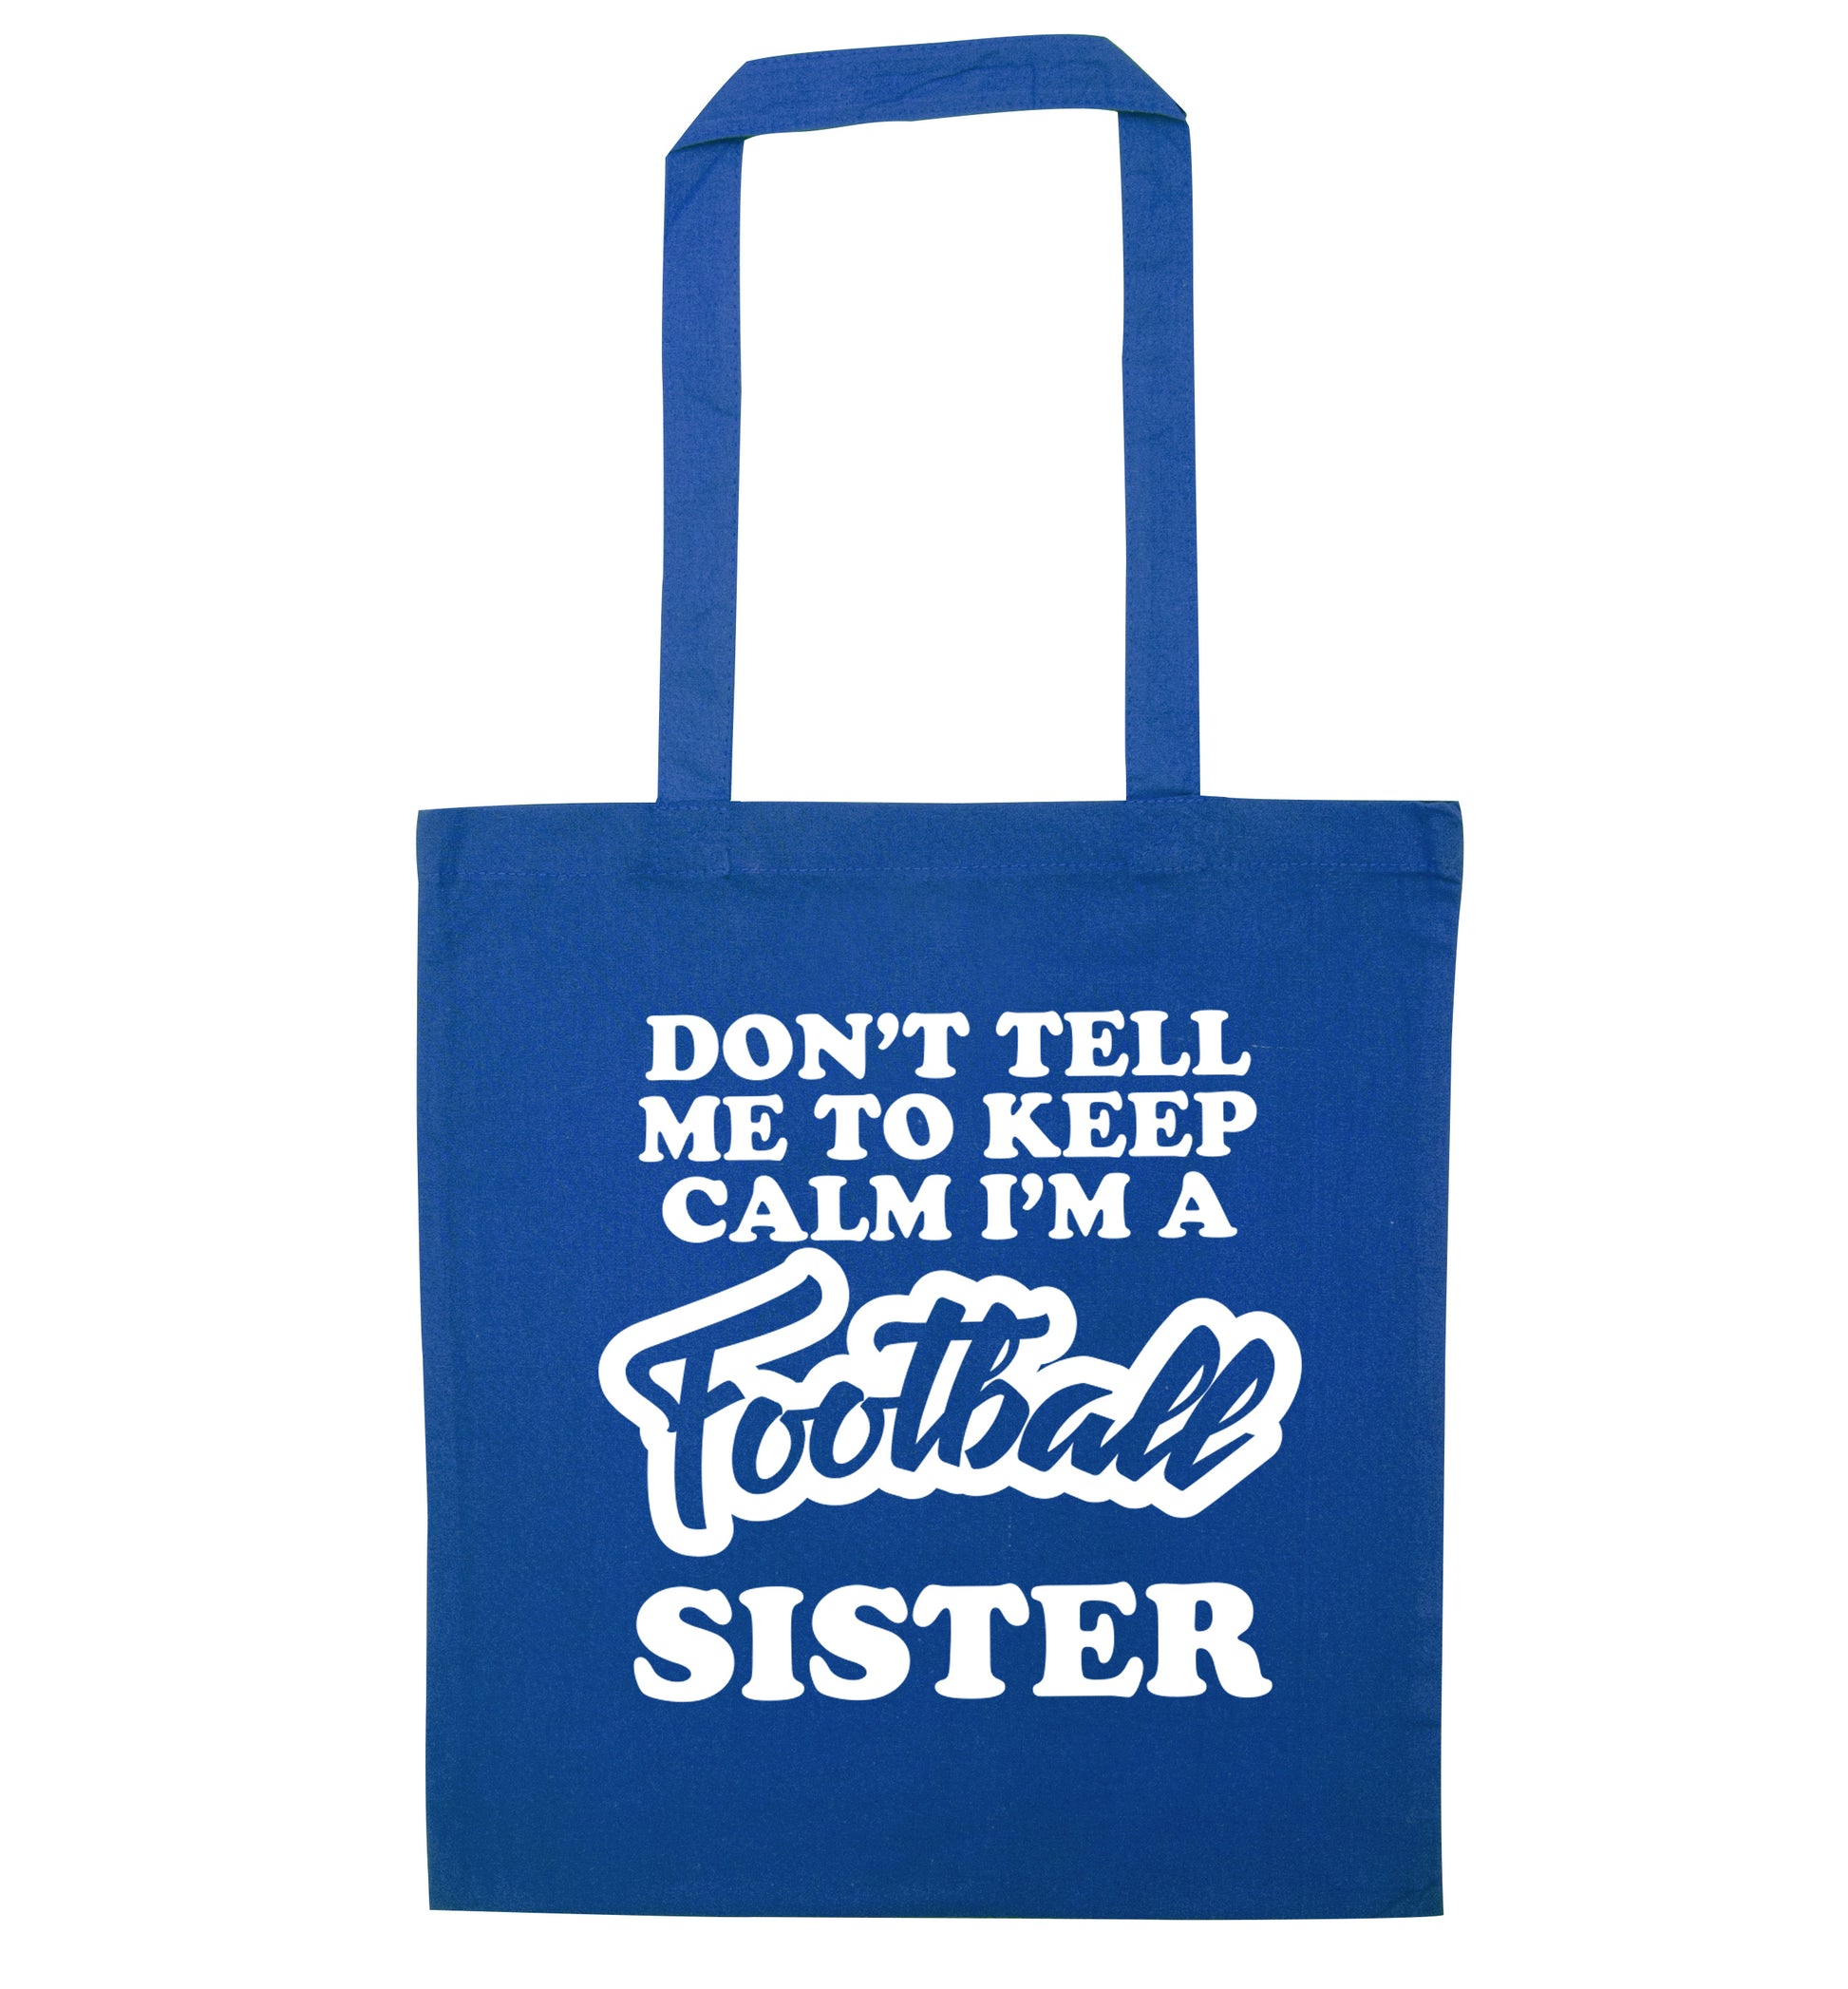 Don't tell me to keep calm I'm a football sister blue tote bag